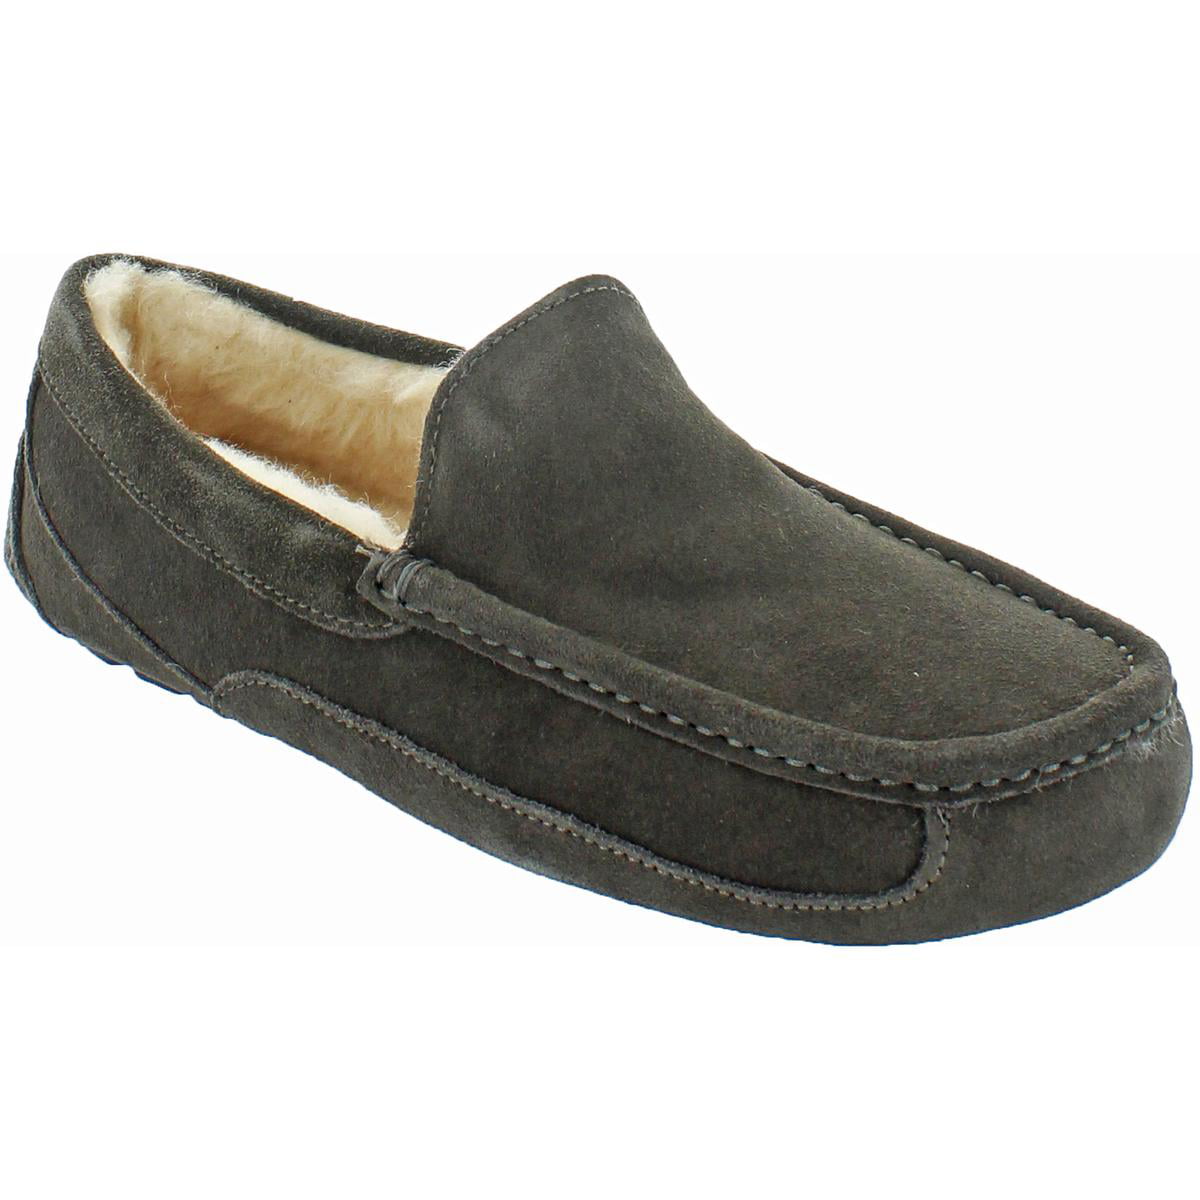 UGG Ascot Men's Casual Comfort Suede Slipper Loafers 1101110 